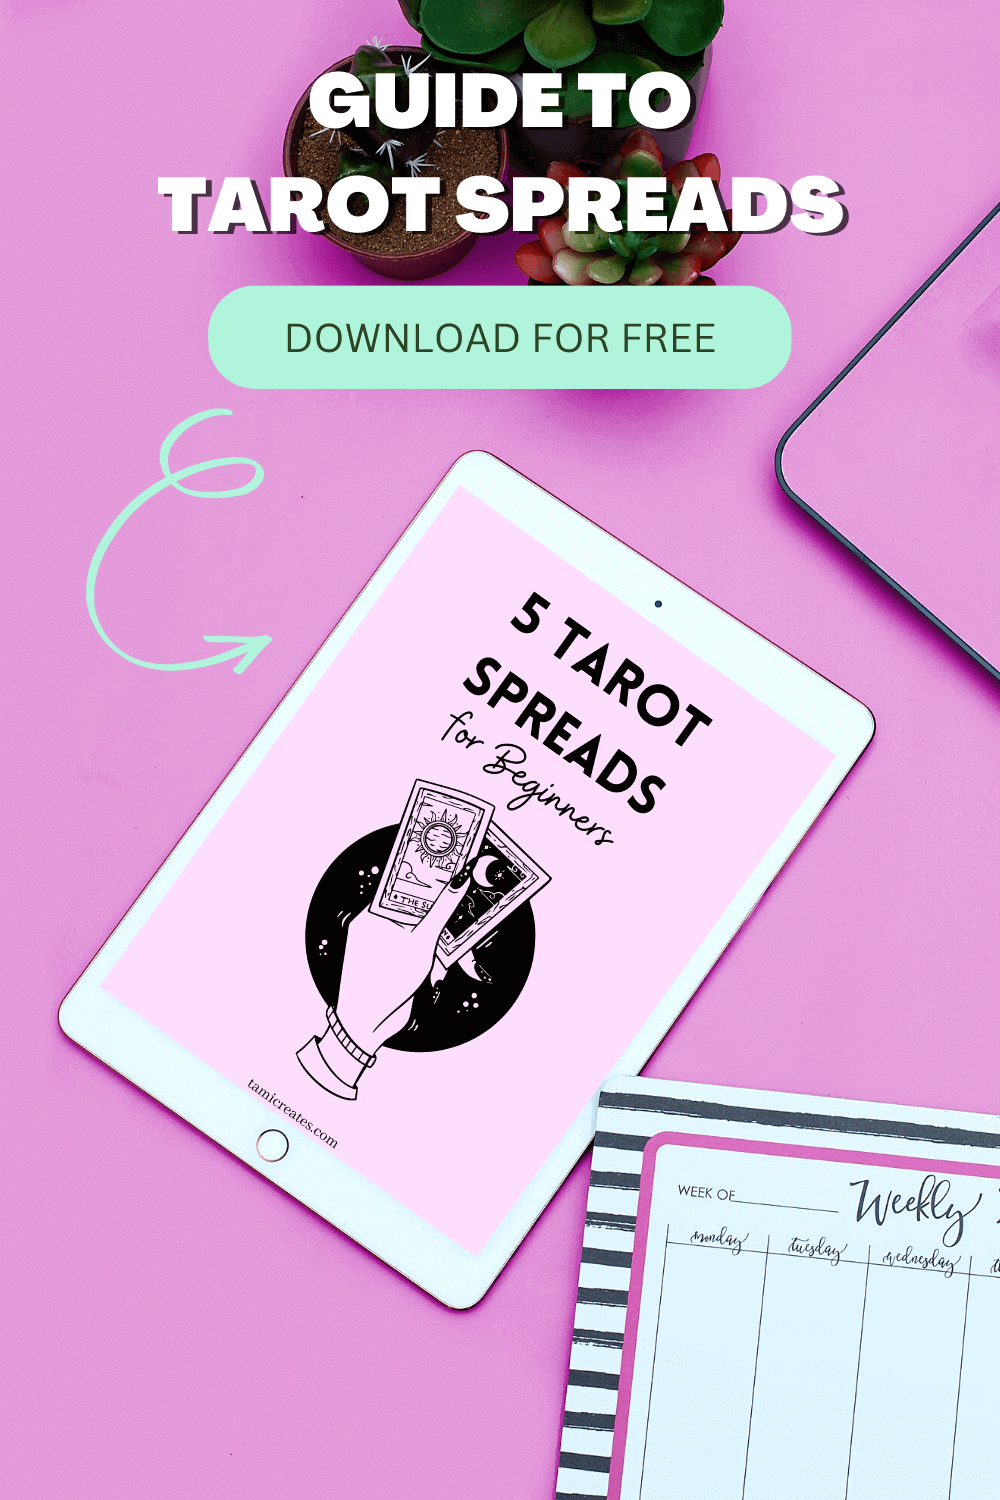 It can be confusing to know where to start with tarot cards. Here's a beginner's guide to tarot cards, plus a free guide to tarot spreads for beginners! #tarotcards #tarotspreads #tarotguide #freeprintable #magic #witchy #wicca